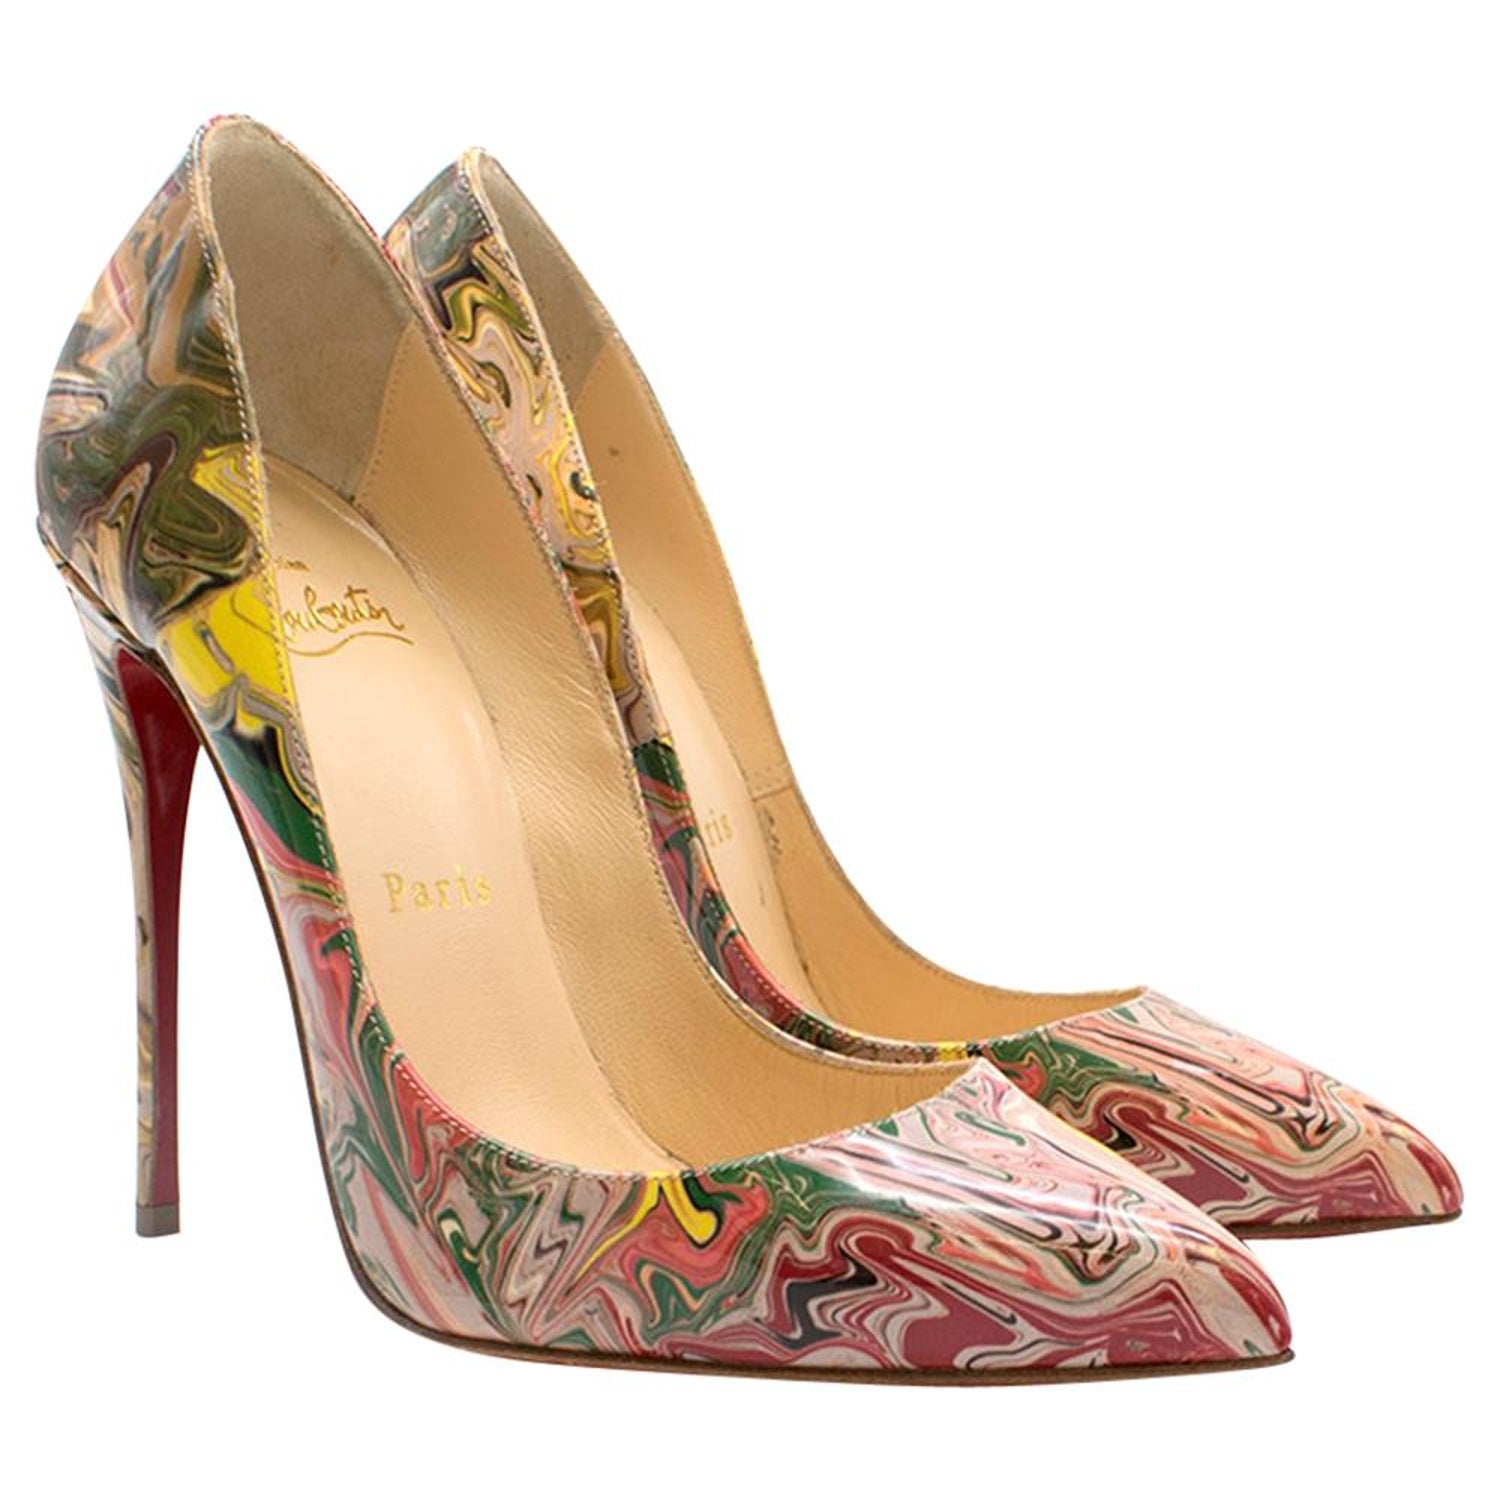 Louboutin Pigalle 120 - 6 For Sale on 1stDibs | christian louboutin pigalle  120, christian louboutin pigalle, pigalle 120mm